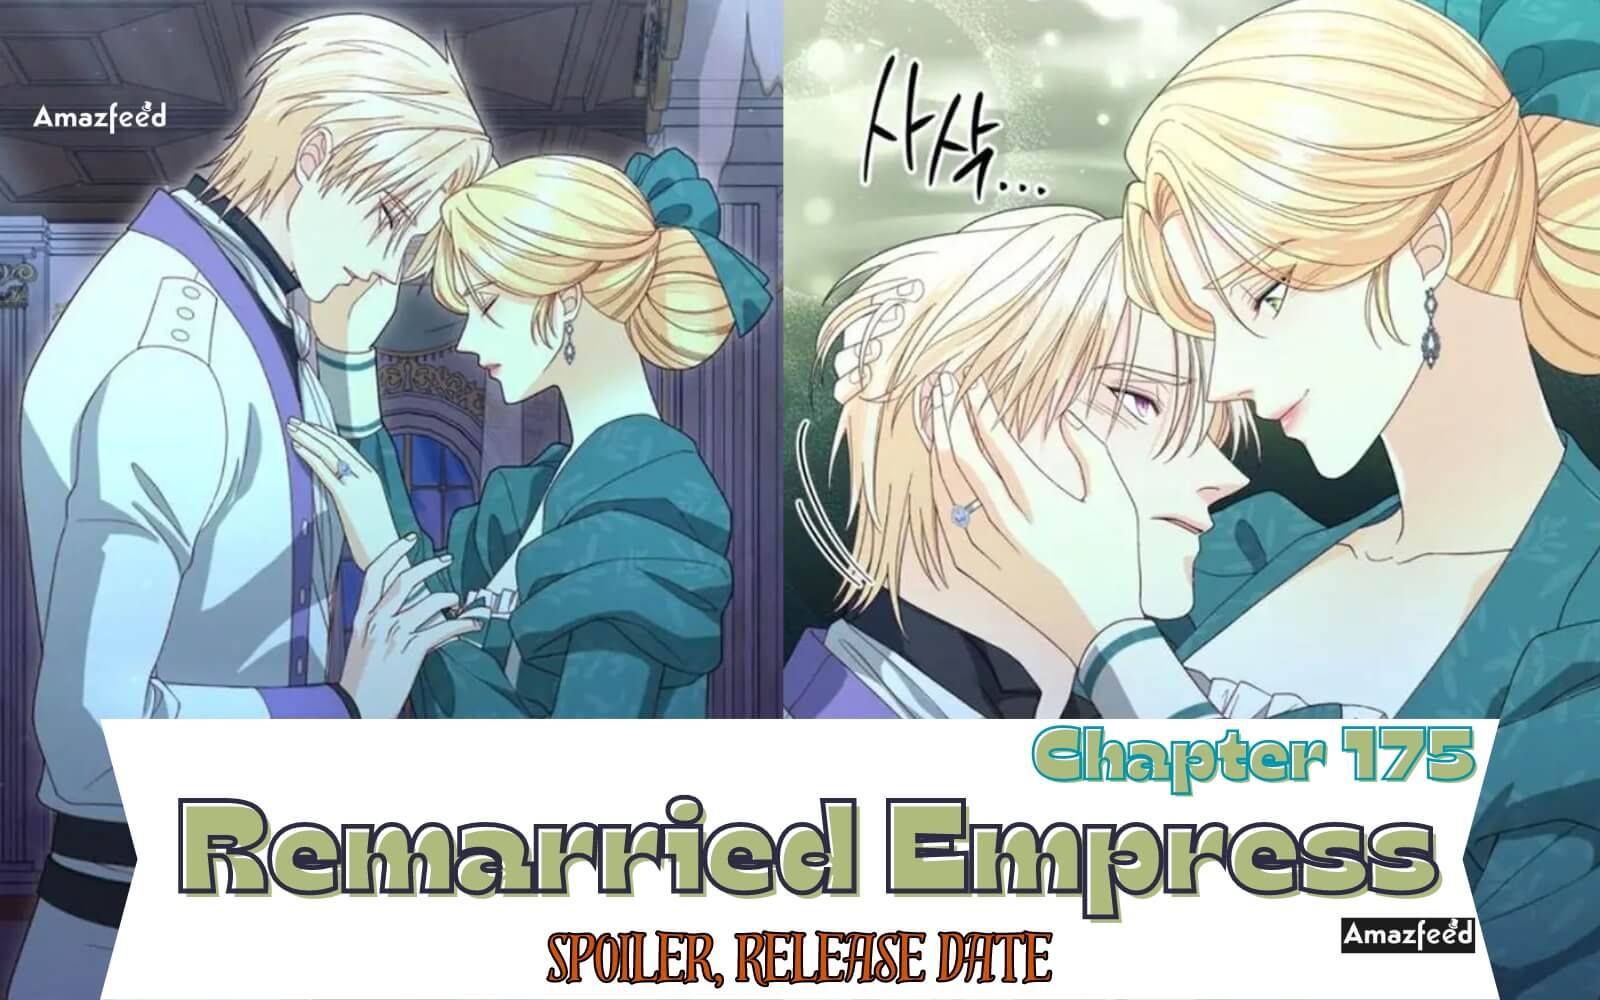 Remarried Empress Chapter 175 Spoiler, Release date